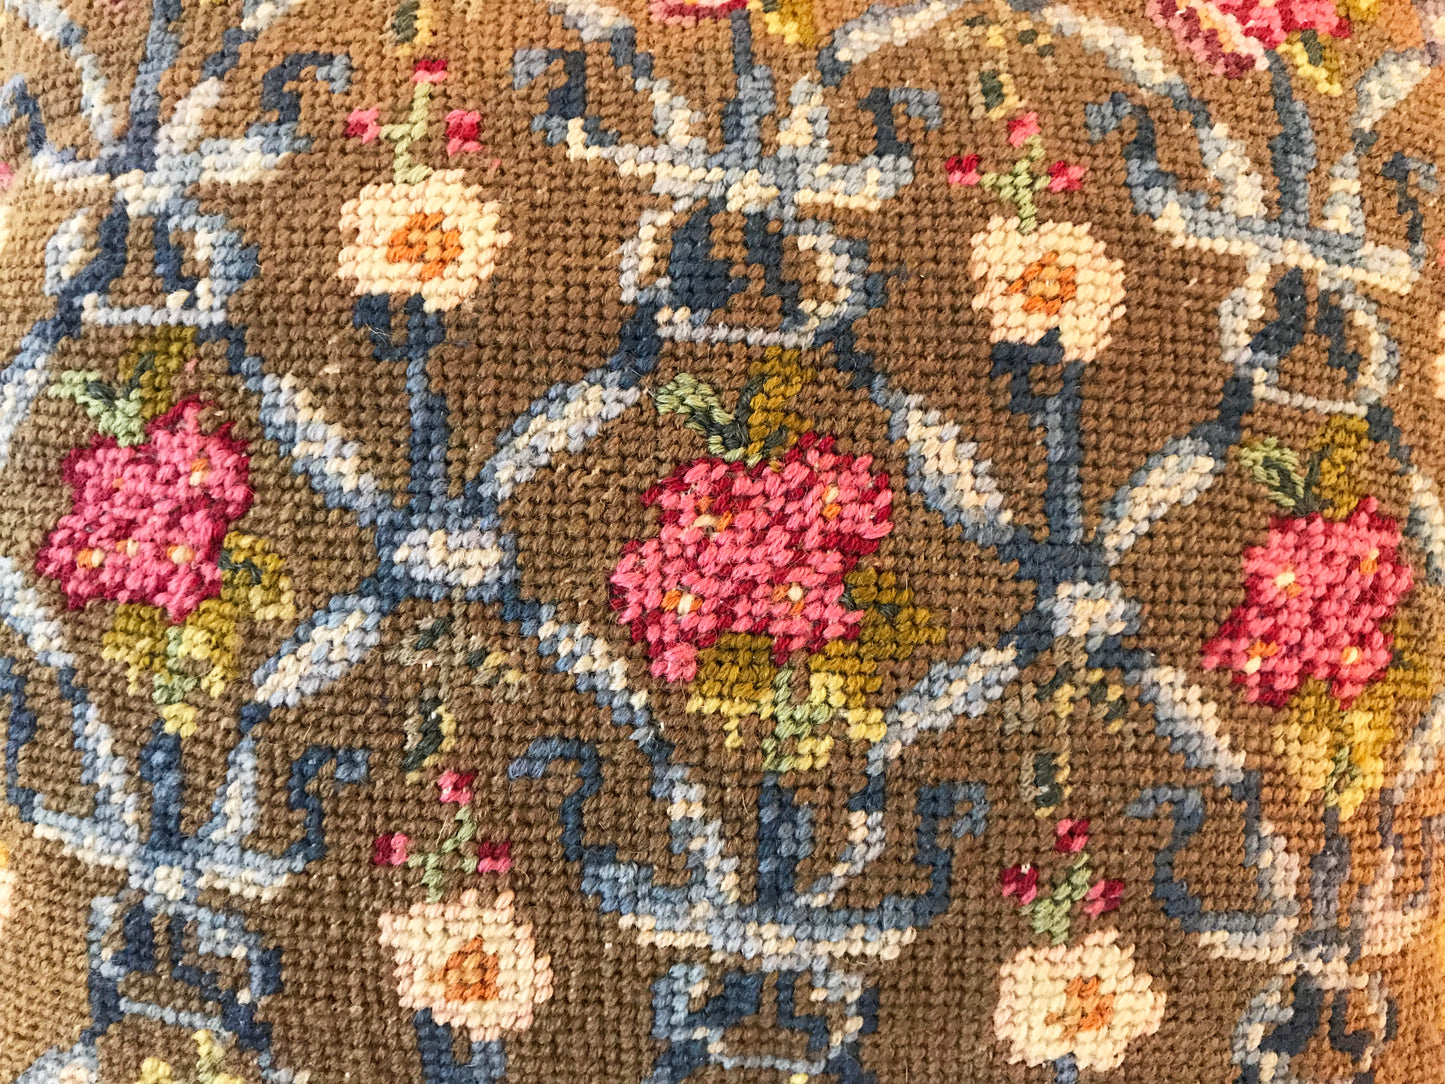 Pair of 18th century French Needlepoint Pillows